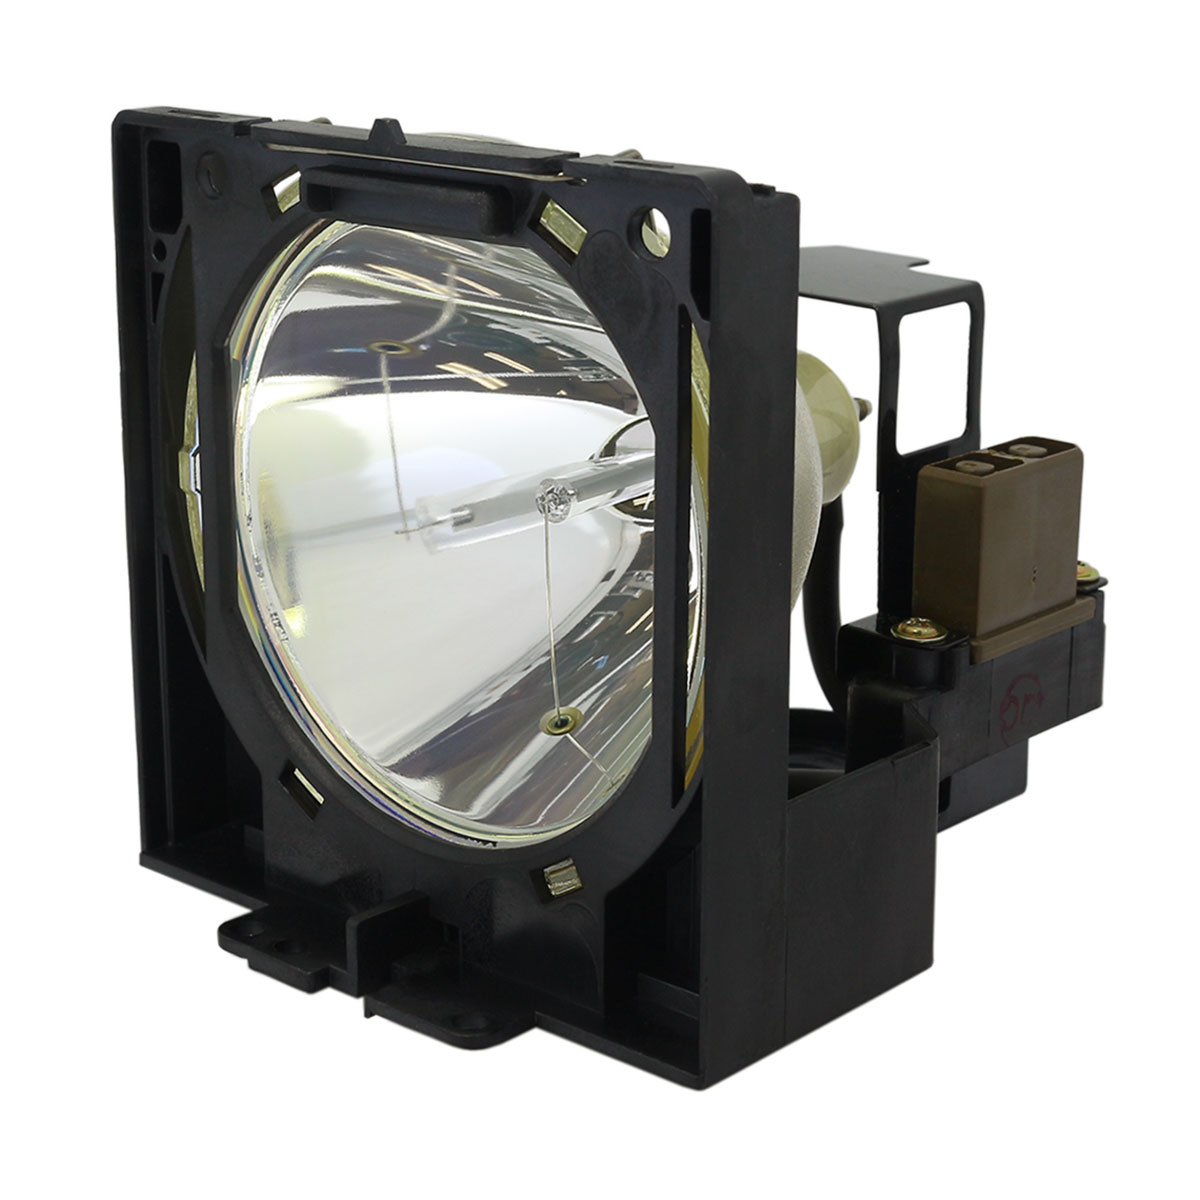 OEM Replacement Lamp & Housing for the Boxlight MP-35T Projector - image 2 of 6